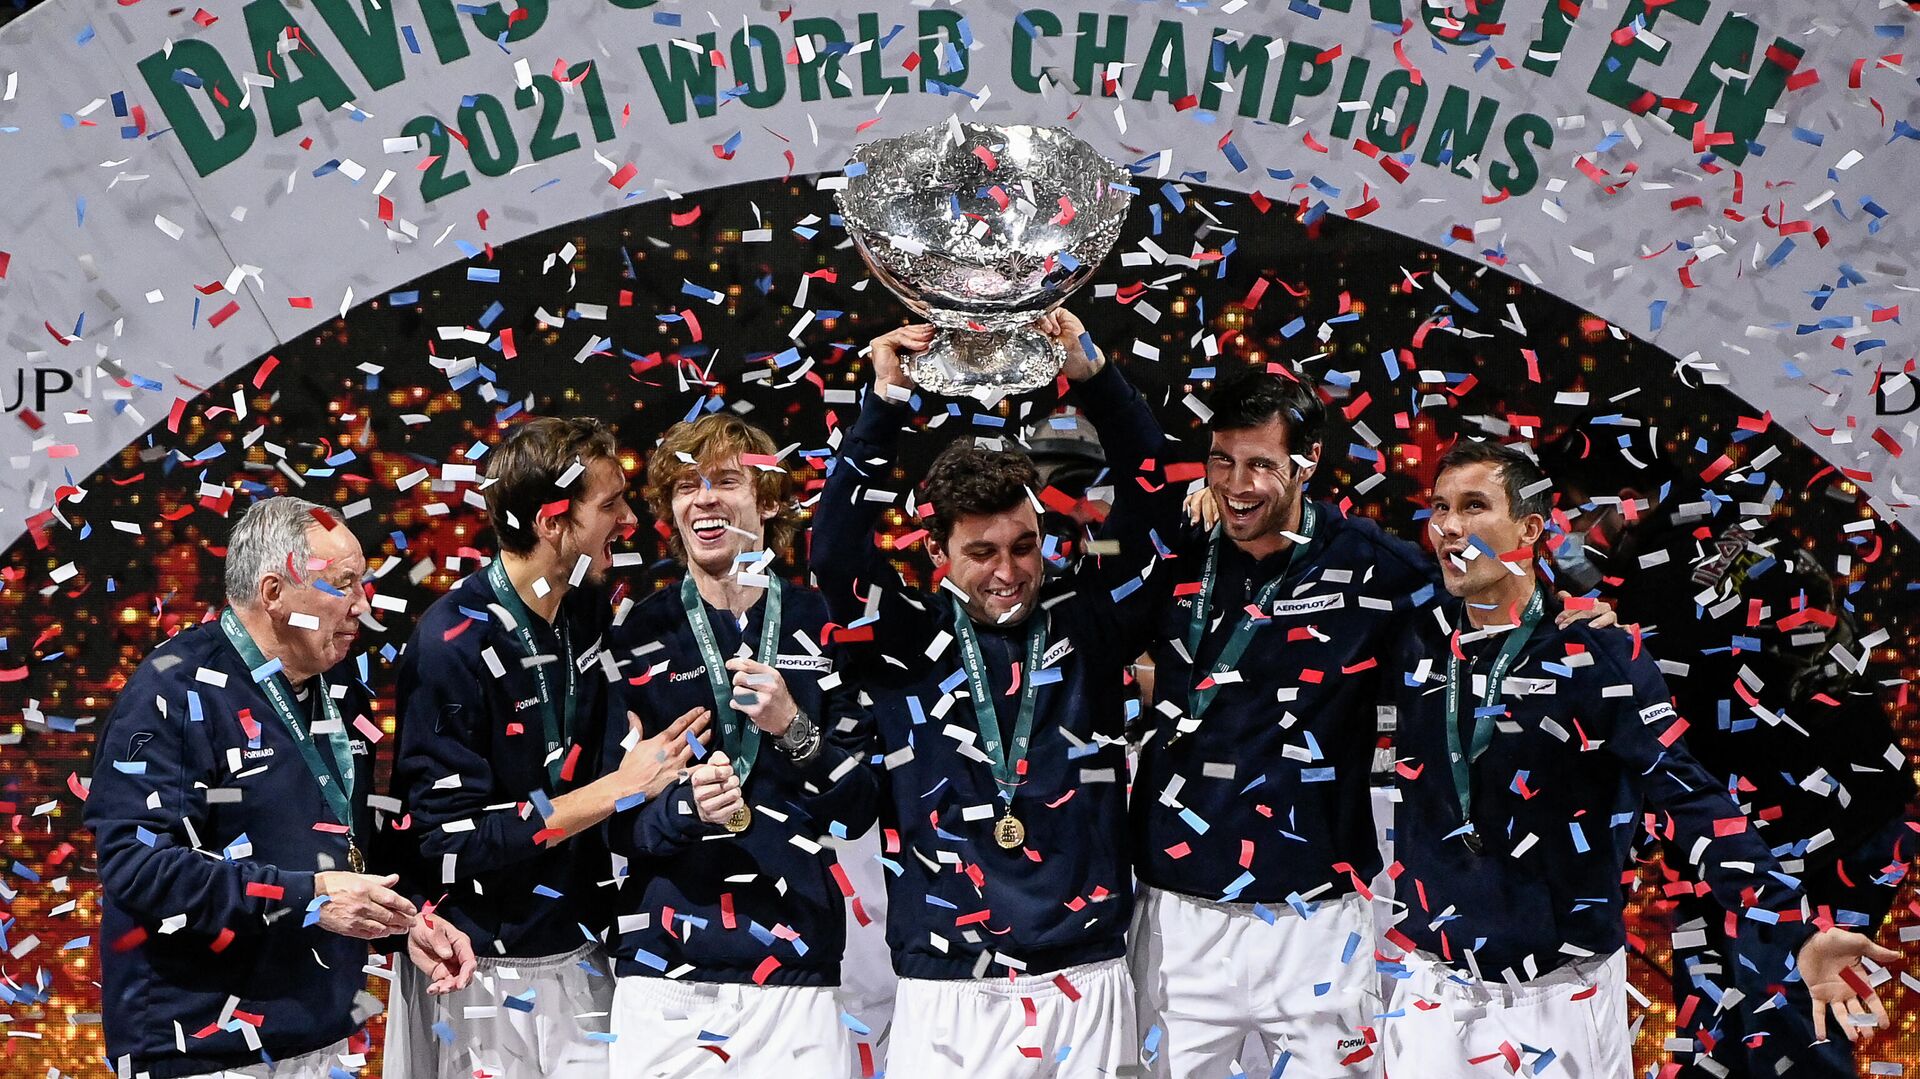 (From L) Russia's Davis Cup captain Shamil Tarpischev, Russia's Daniil Medvedev, Russia's Andrey Rublev, Russia's Aslan Karatsev, Russia's Karen Khachanov and Russia's Evgeny Donskoy celebrate with the trophy after winning the Davis Cup tennis tournament at the Madrid arena in Madrid on December 5, 2021. (Photo by PIERRE-PHILIPPE MARCOU / AFP) - РИА Новости, 1920, 05.12.2021